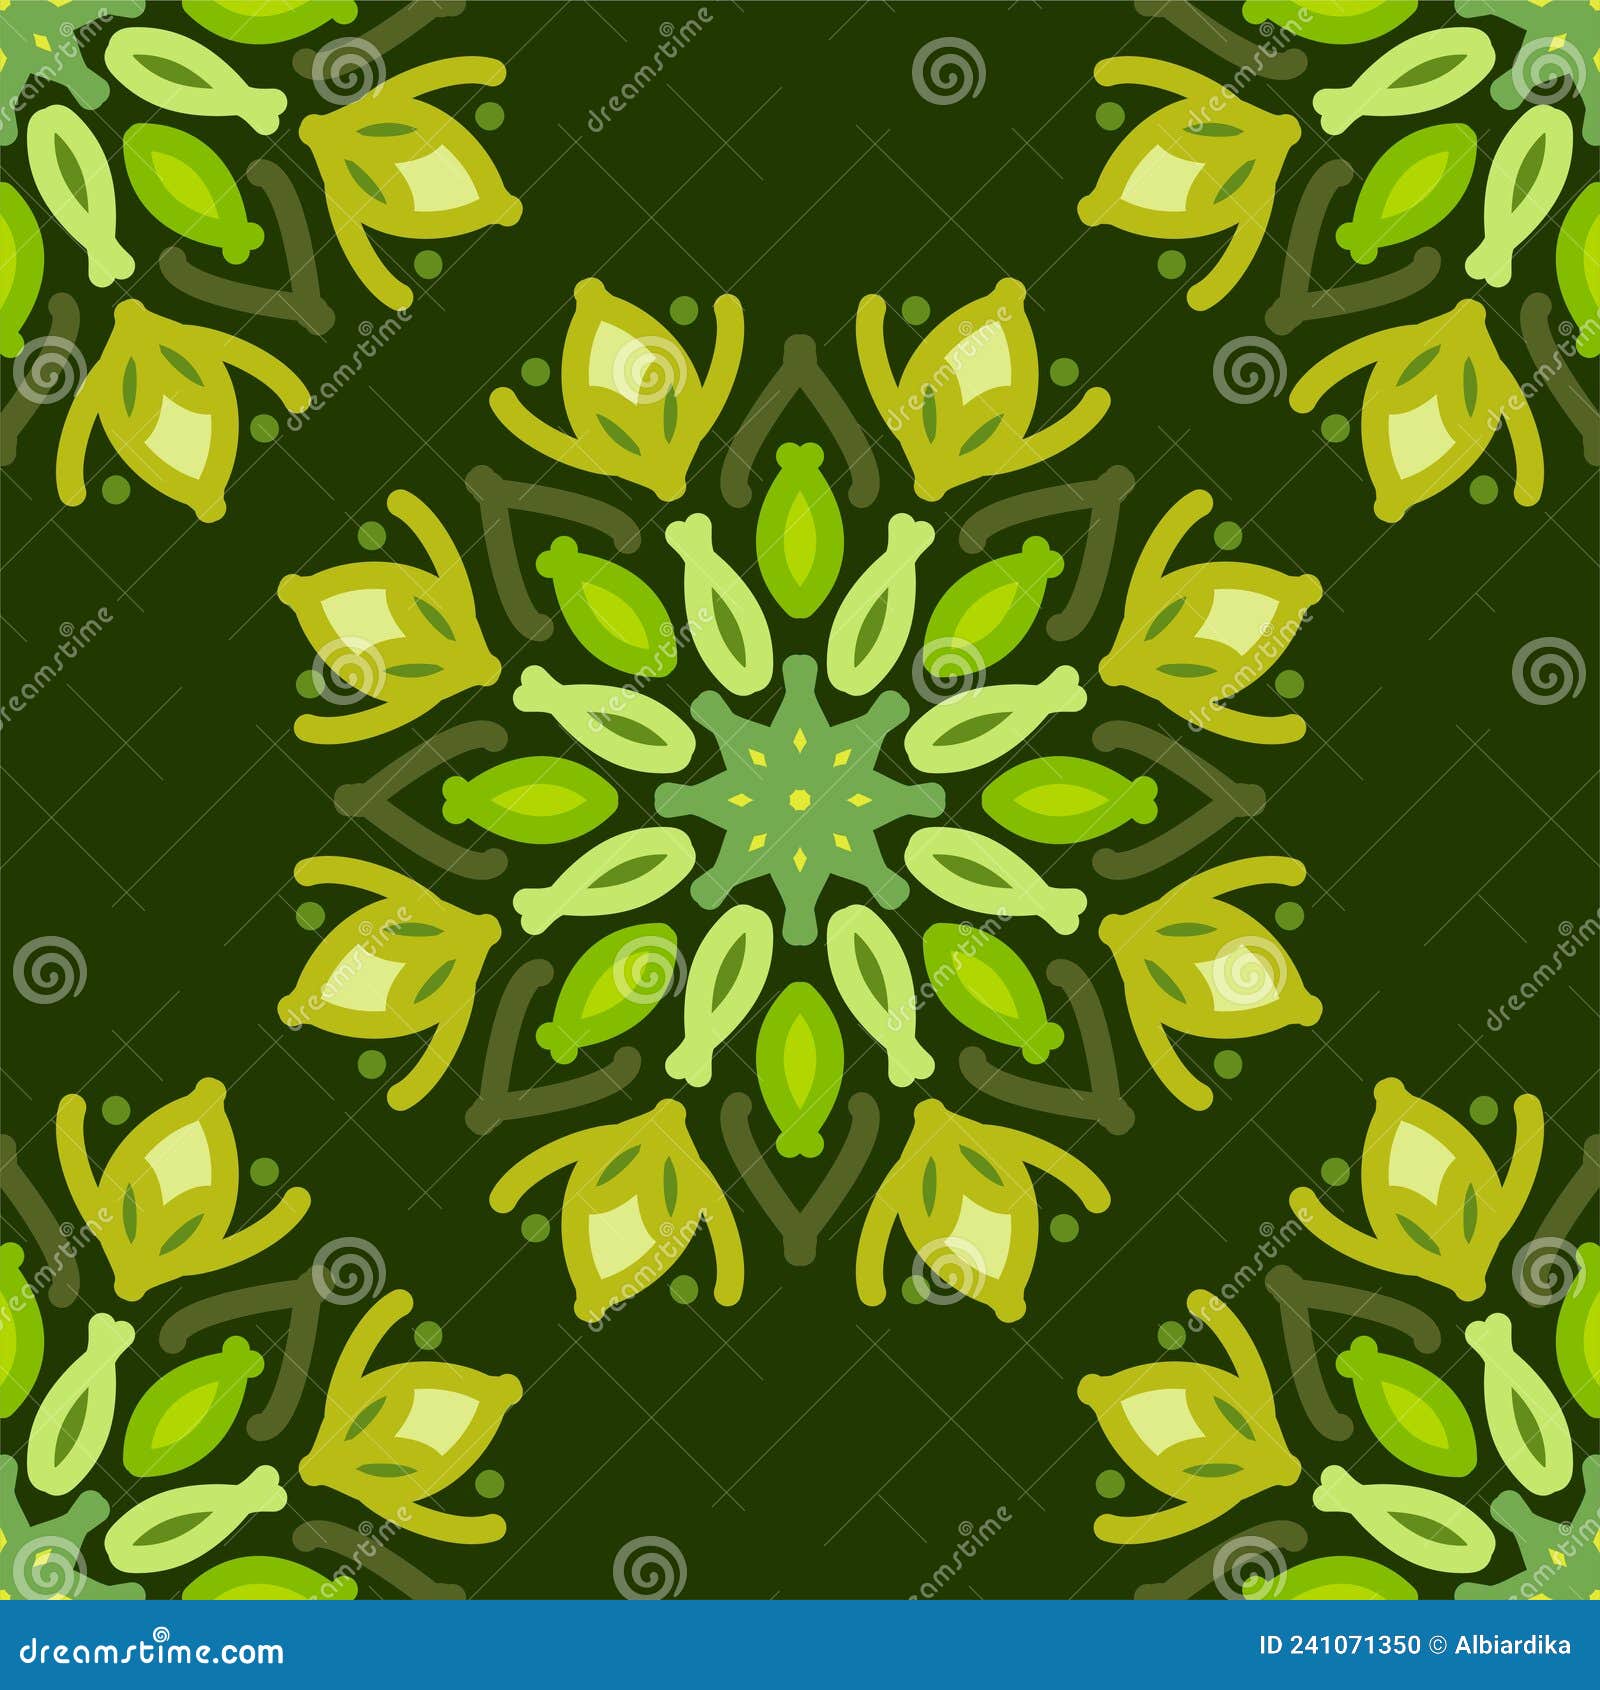 Seamless Pattern Green Mint Olive Forest Mandala Floral Creative